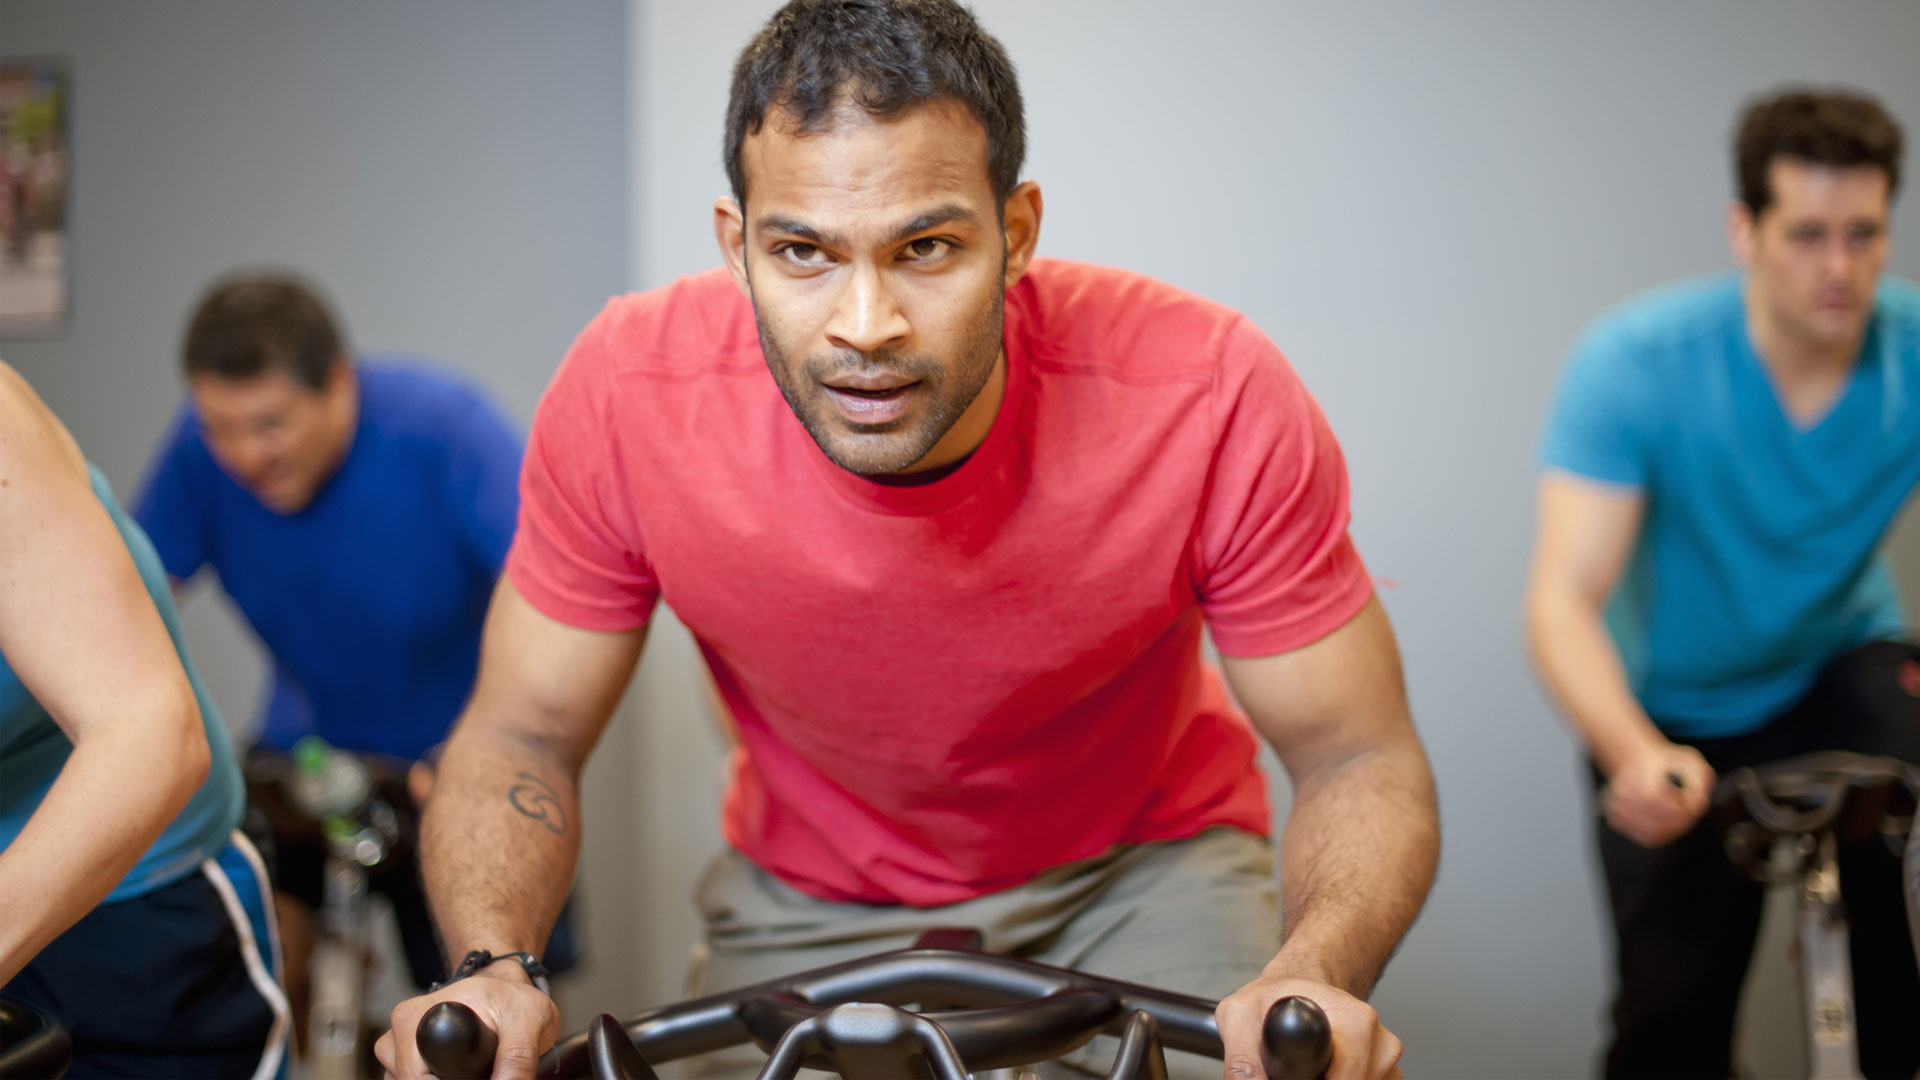 How to lose weight using a stationary bike: image shows man on stationary bike